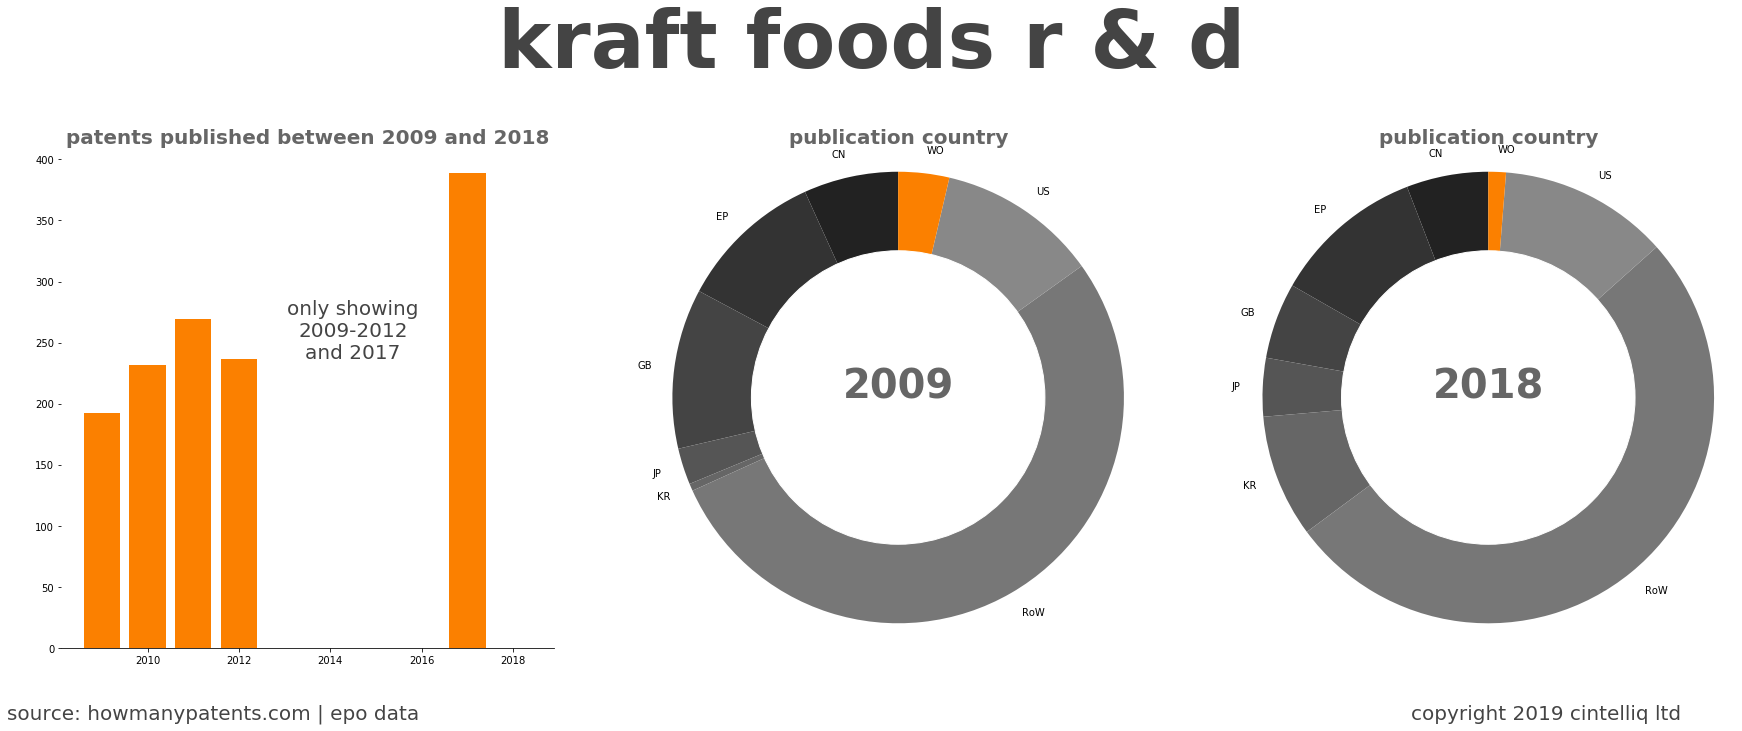 summary of patents for Kraft Foods R & D